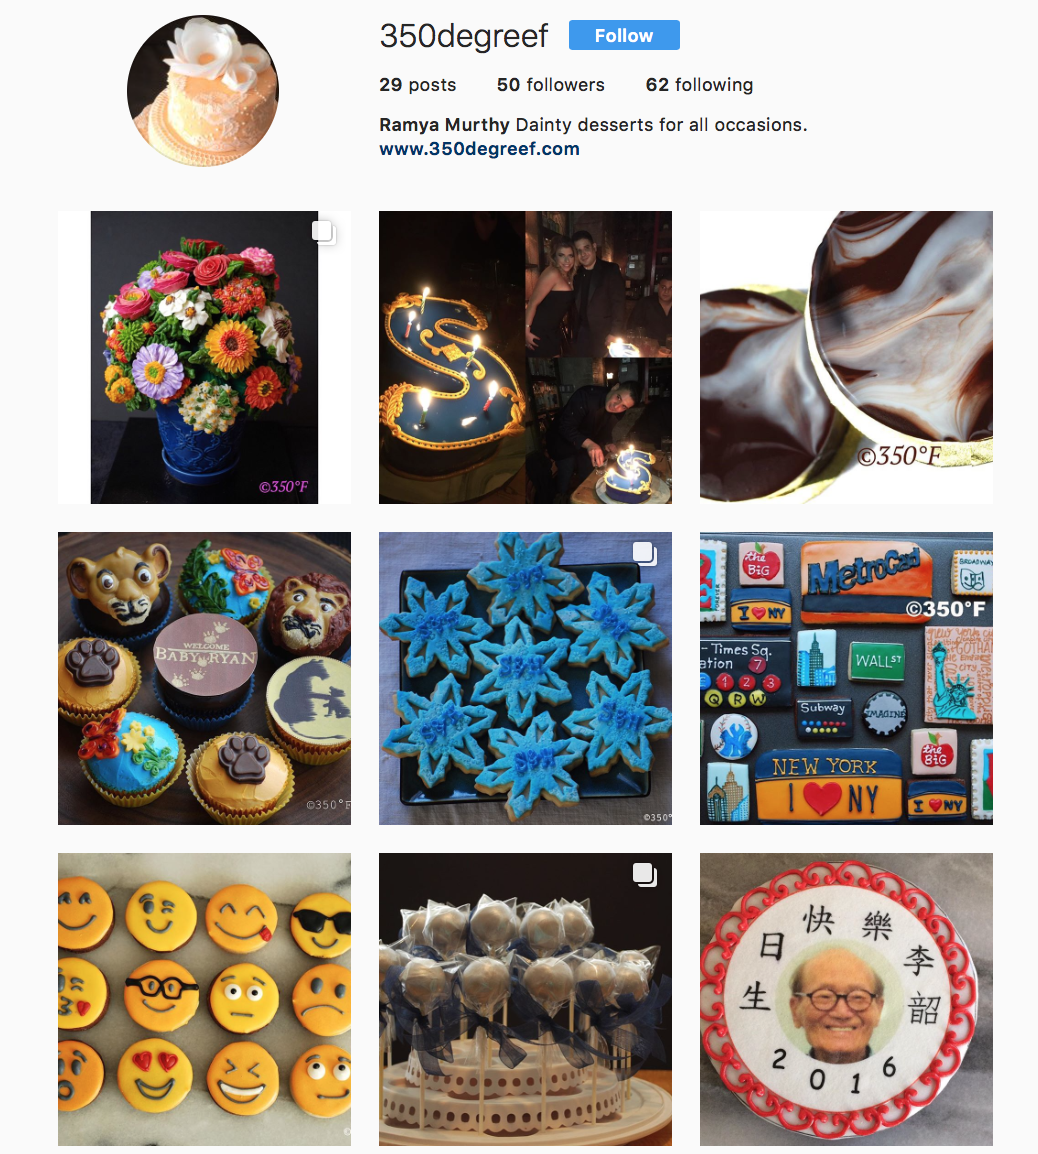 Follow us on instagram at 350degreef